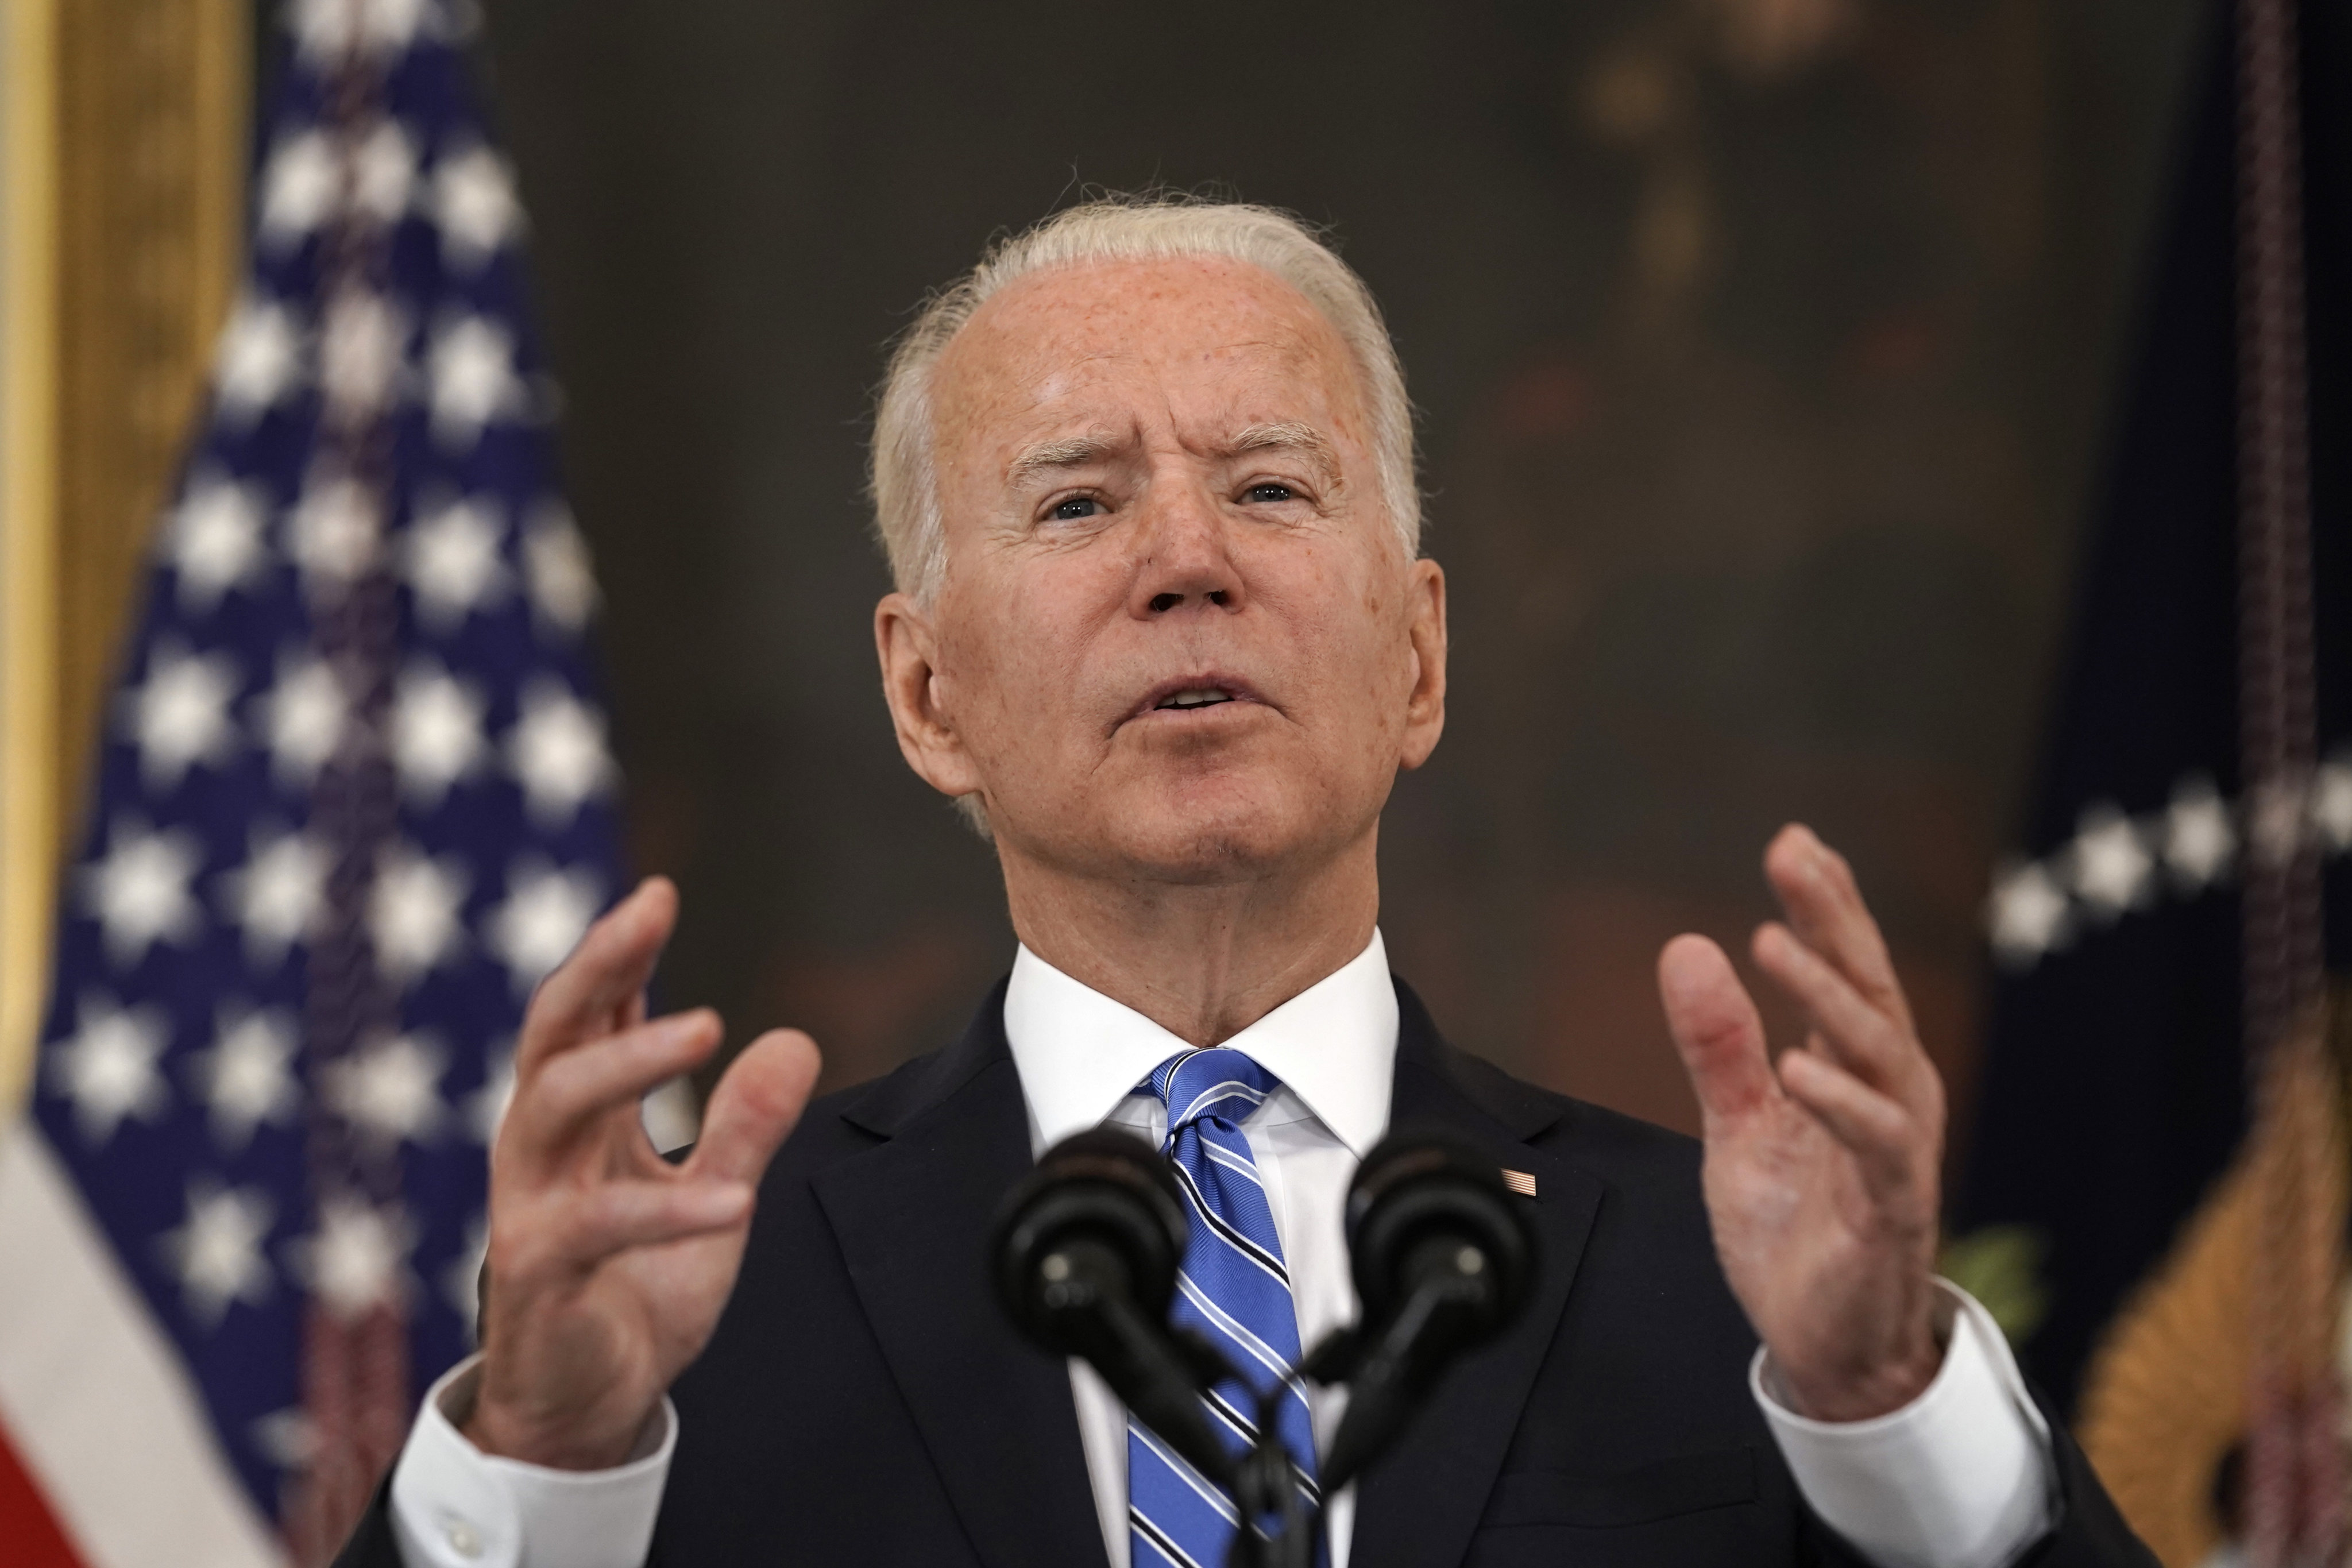 US President Joe Biden is considered a liberal on matters of race but his foreign policy echoes much of Donald Trump’s rhetoric on China. Photo: Bloomberg